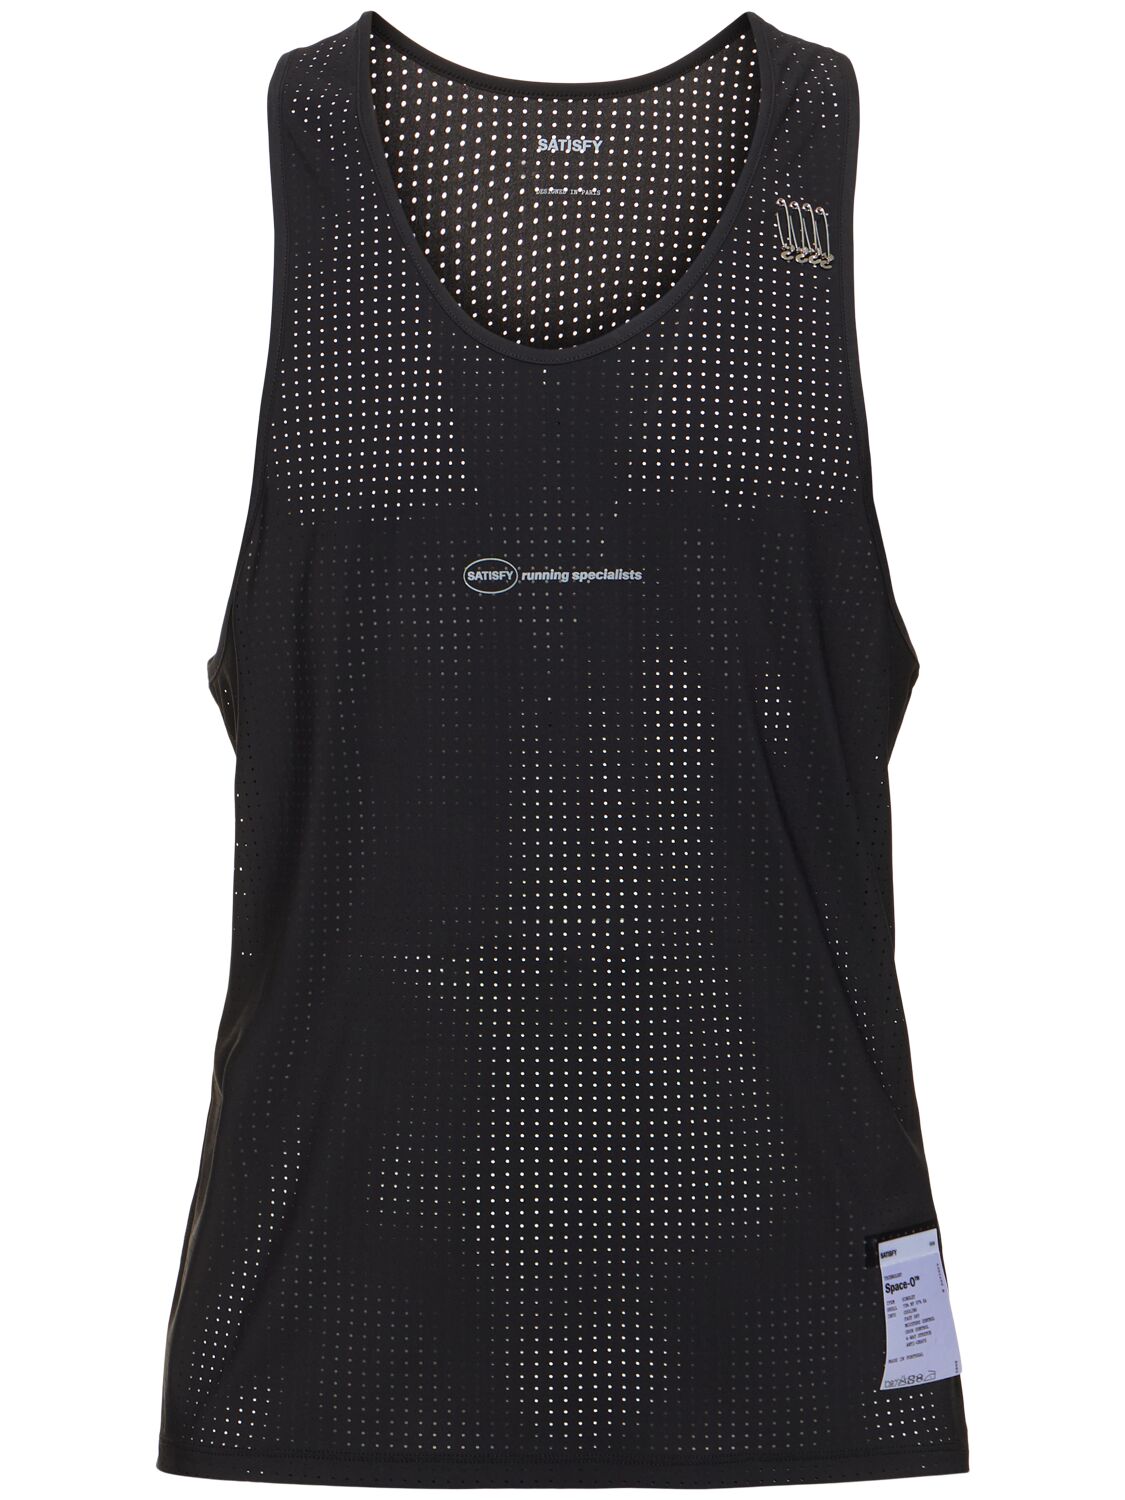 Image of Space-o Stretch Tech Tank Top